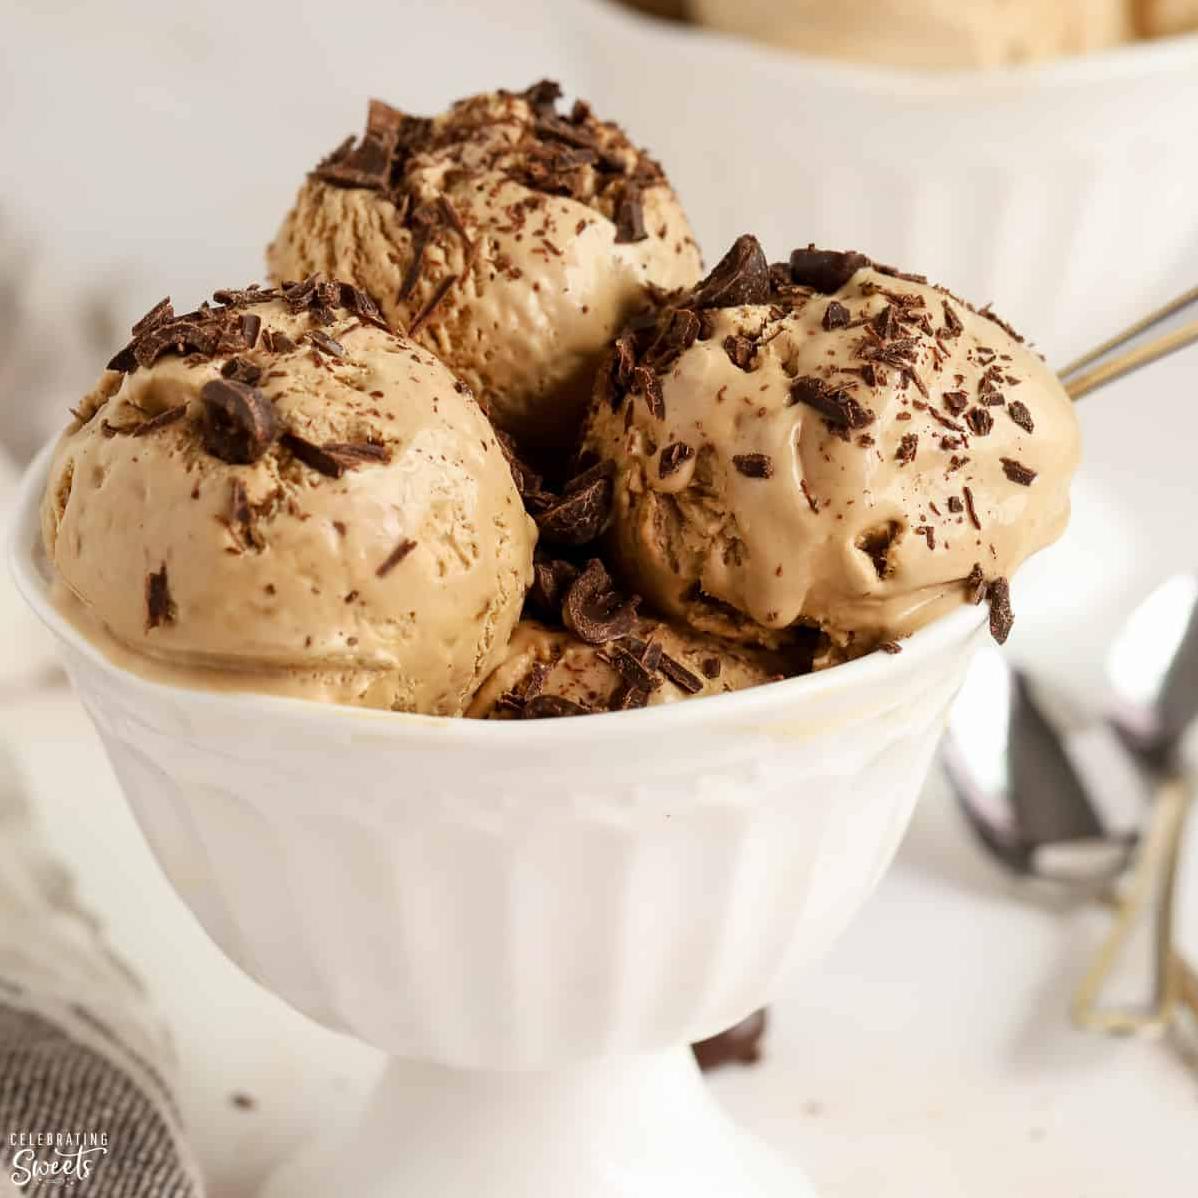  Because coffee is always a good idea - even in ice cream form!